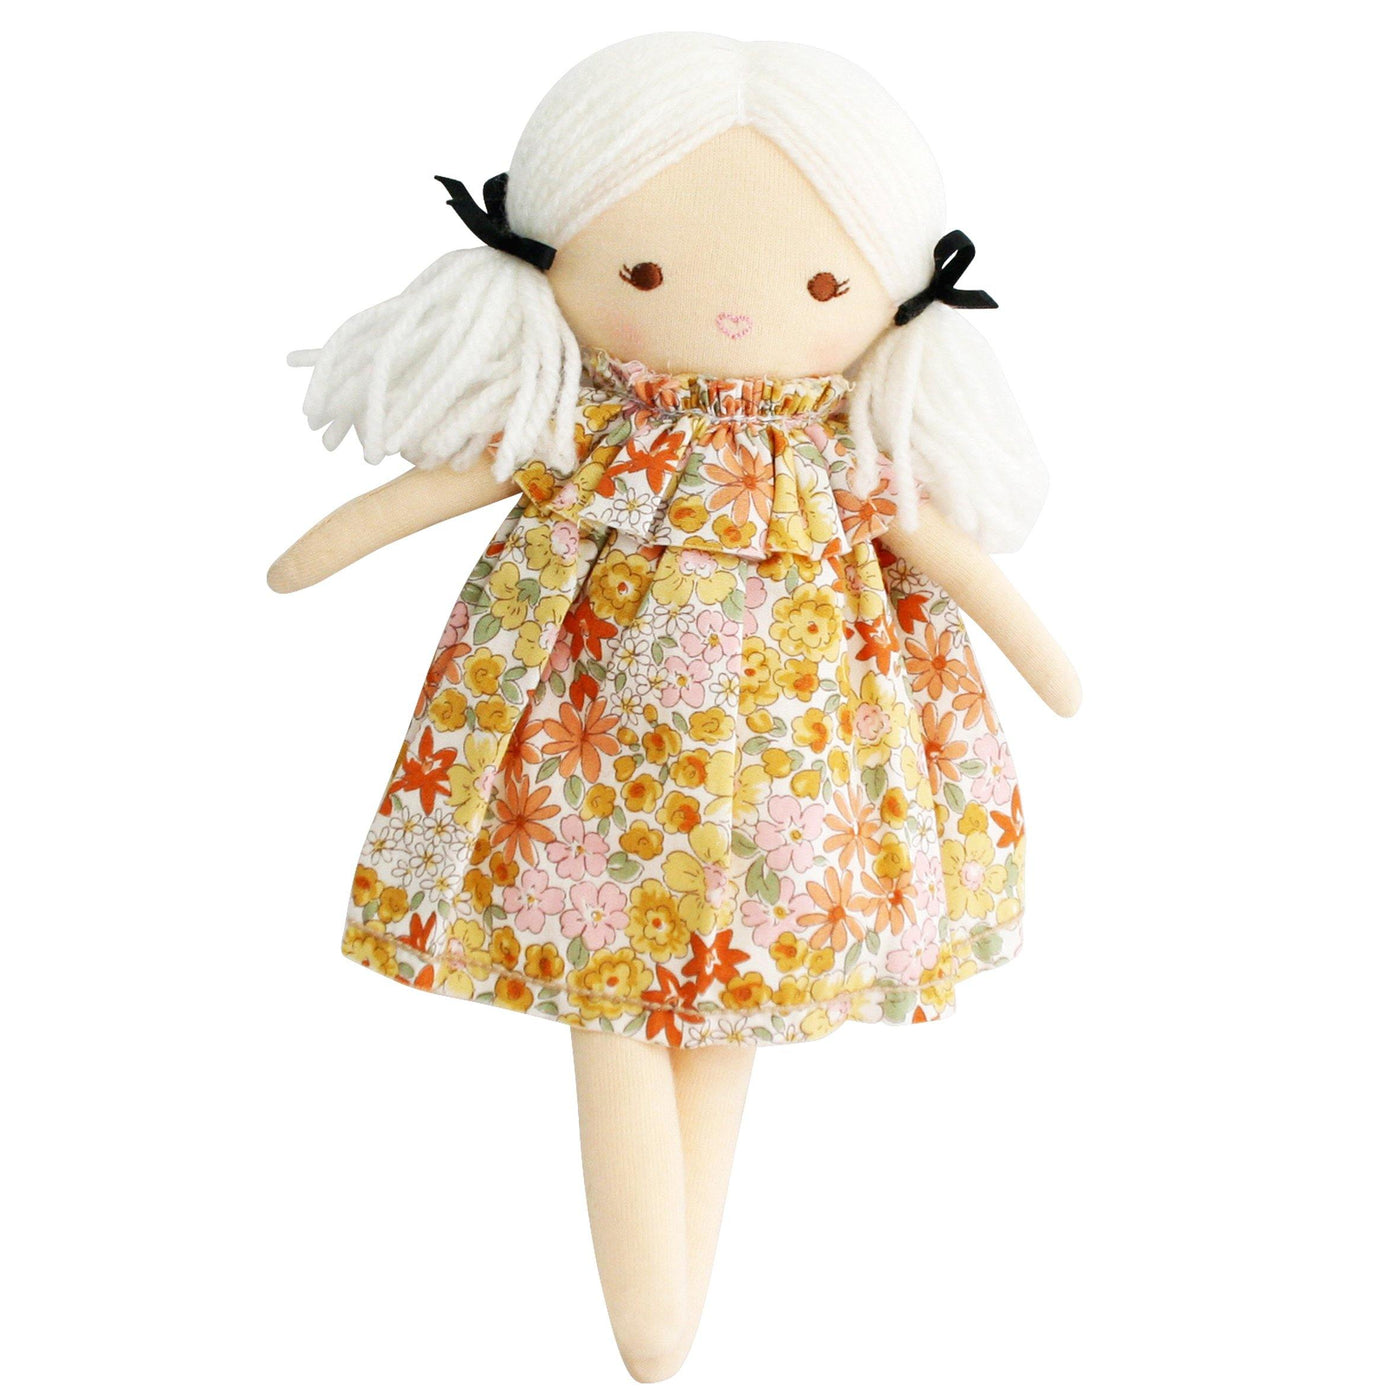 Matilda doll with floral dress and white hair with wide open eyes